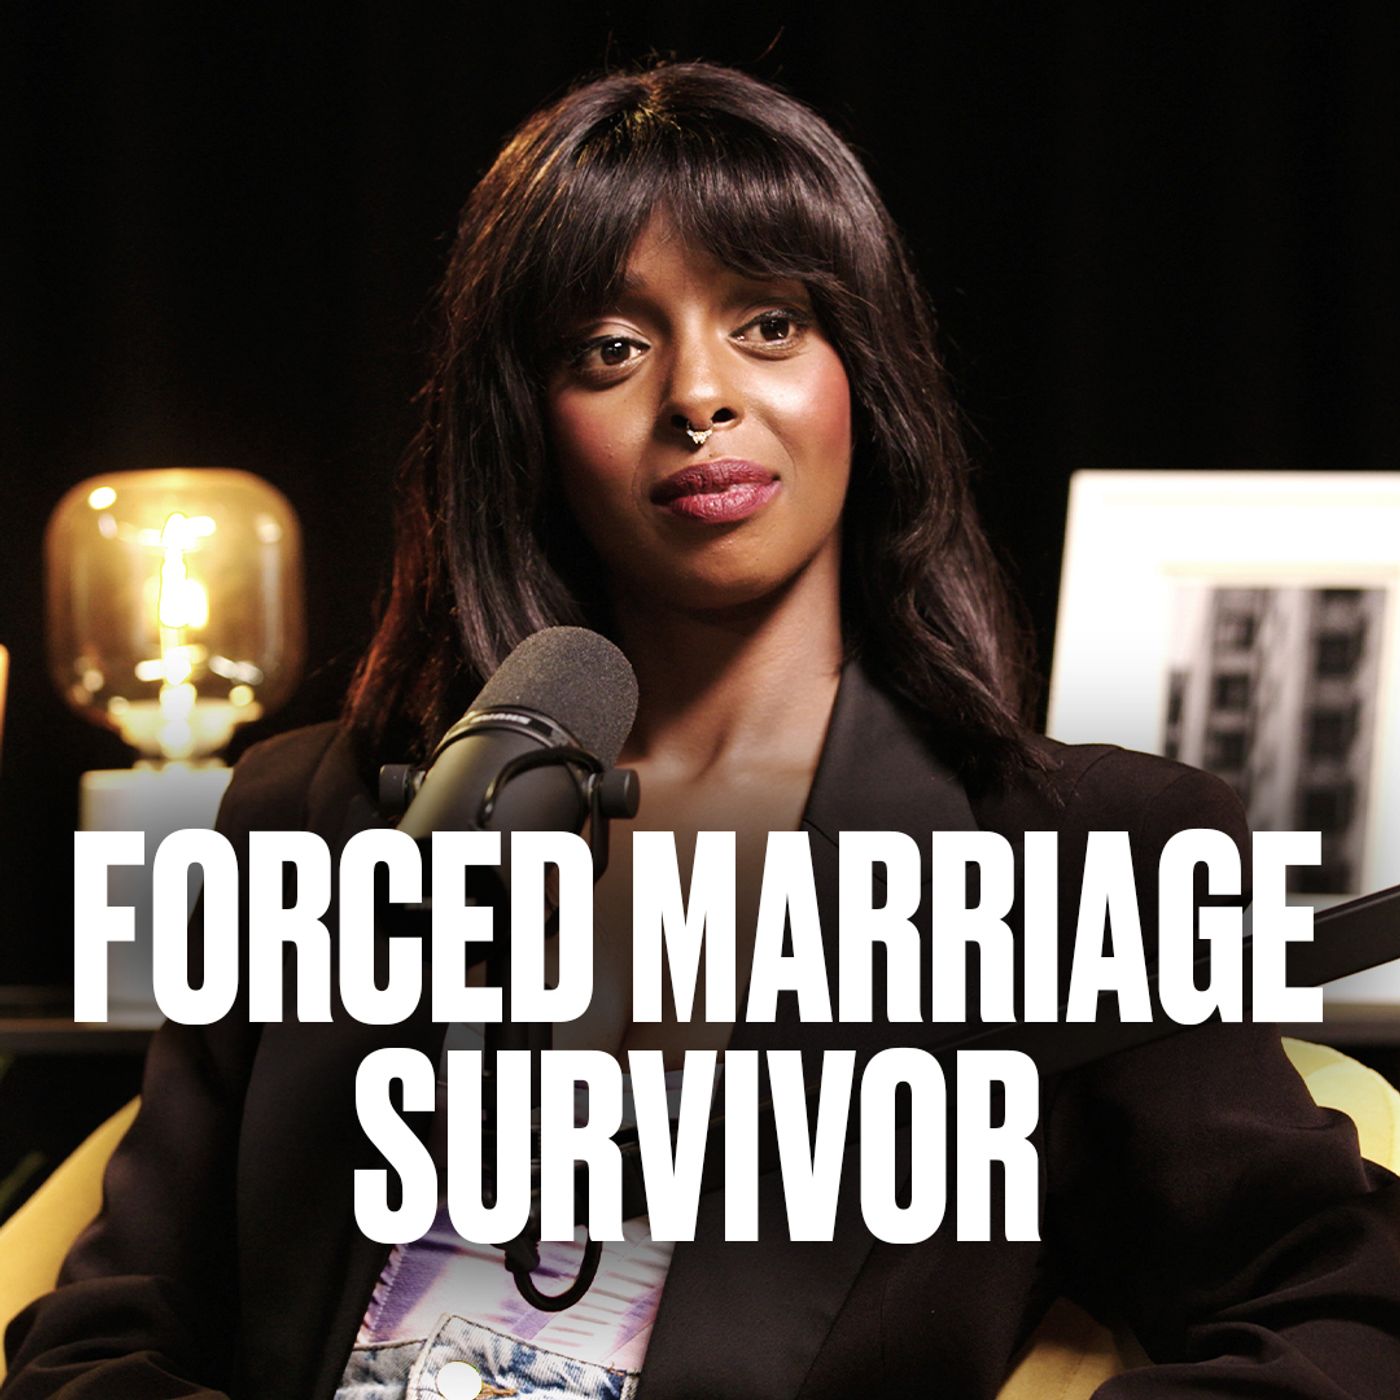 S2 Ep6: I Was Forced To Marry My Cousin & Suffered Female Genital Mutilation Aged 6